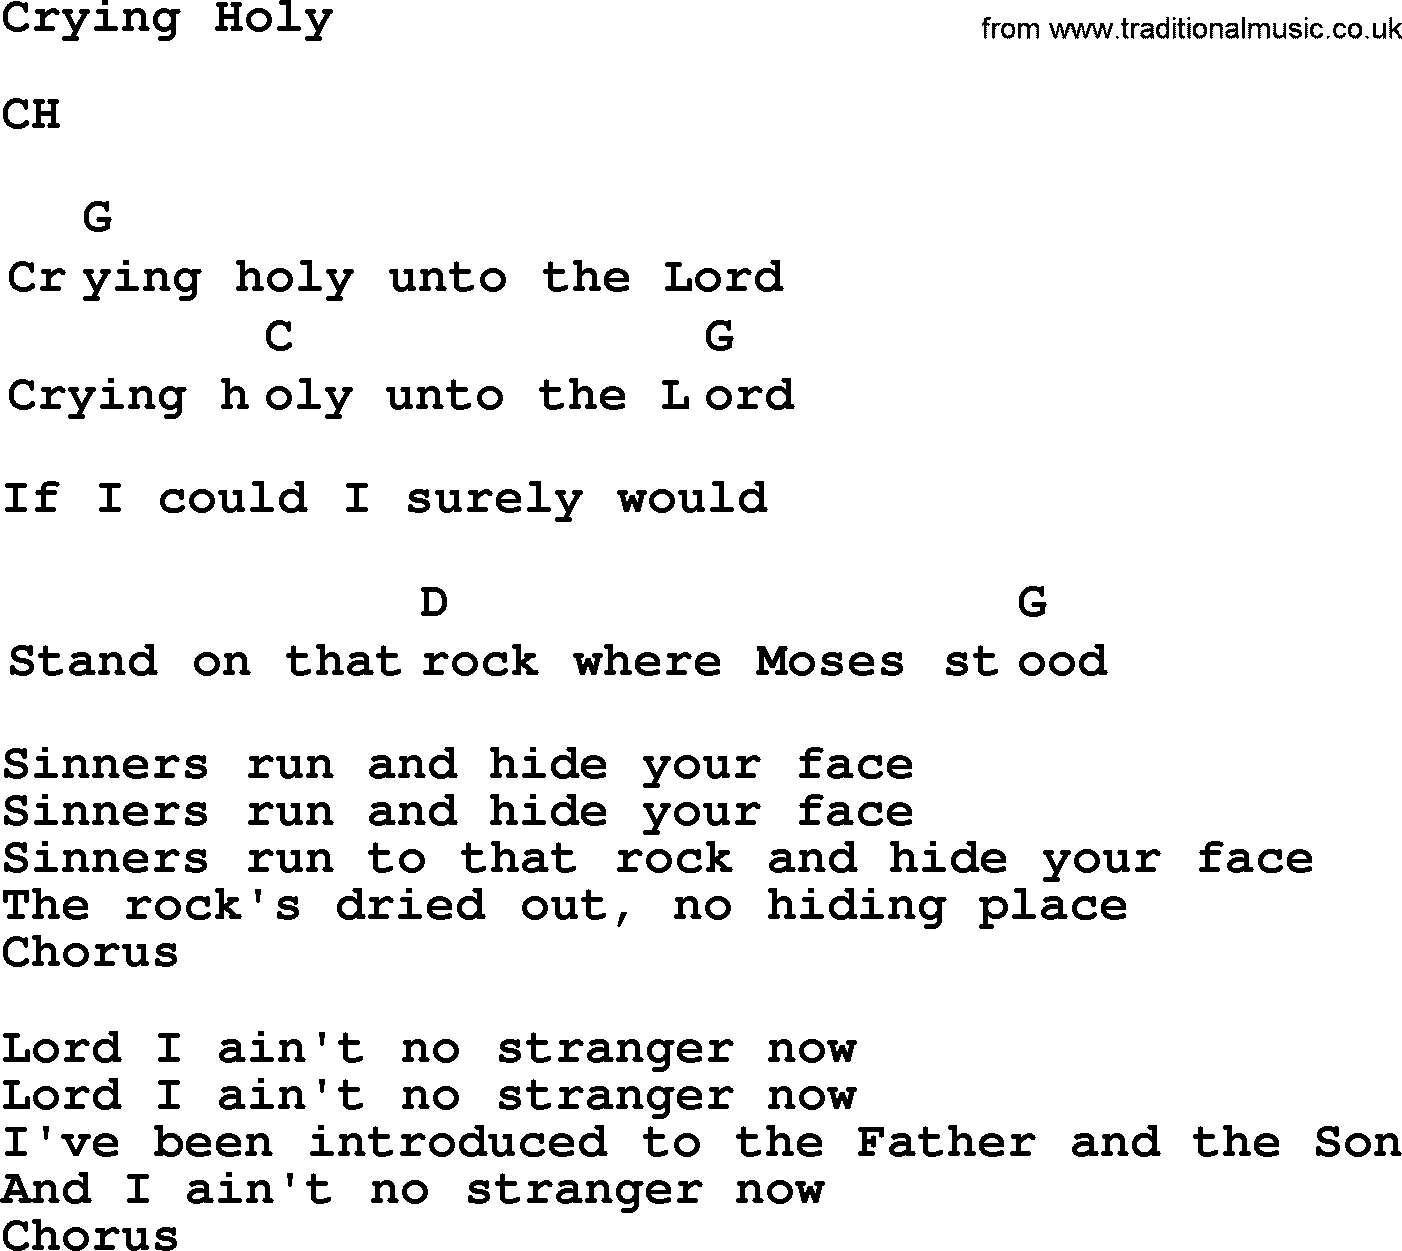 Top 1000 Most Popular Folk and Old-time Songs: Crying Holy, lyrics and chords